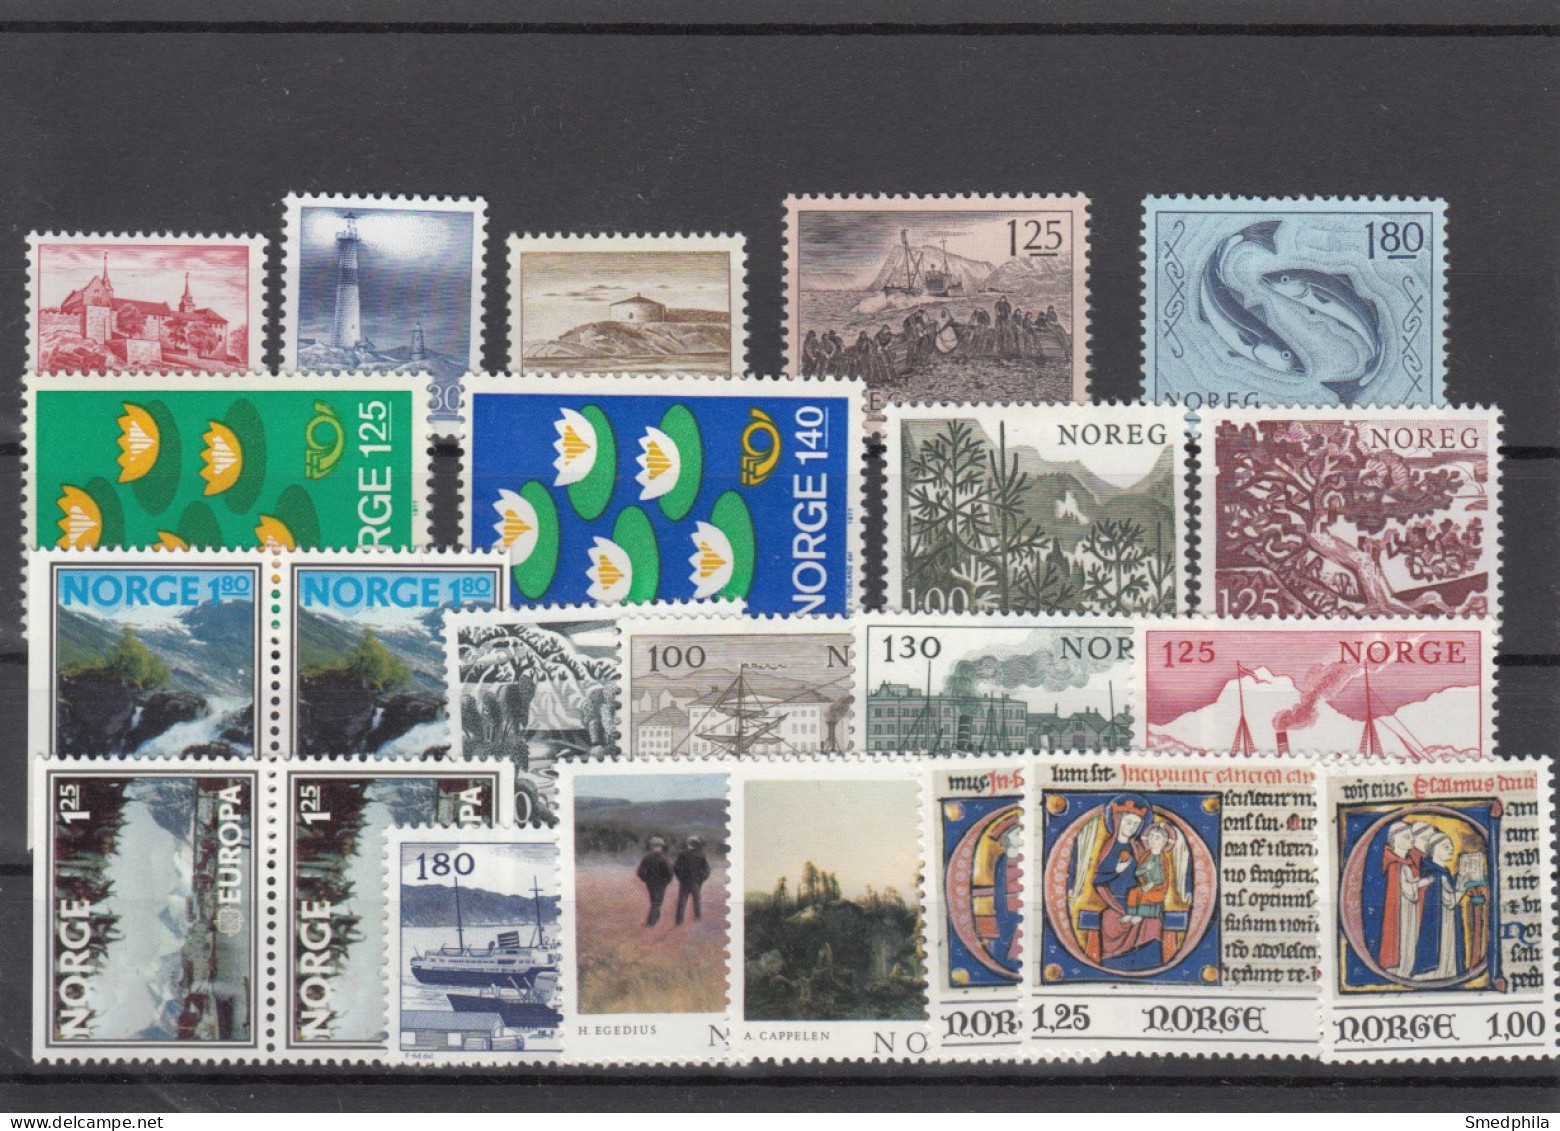 Norway 1977 - Full Year MNH ** - Años Completos